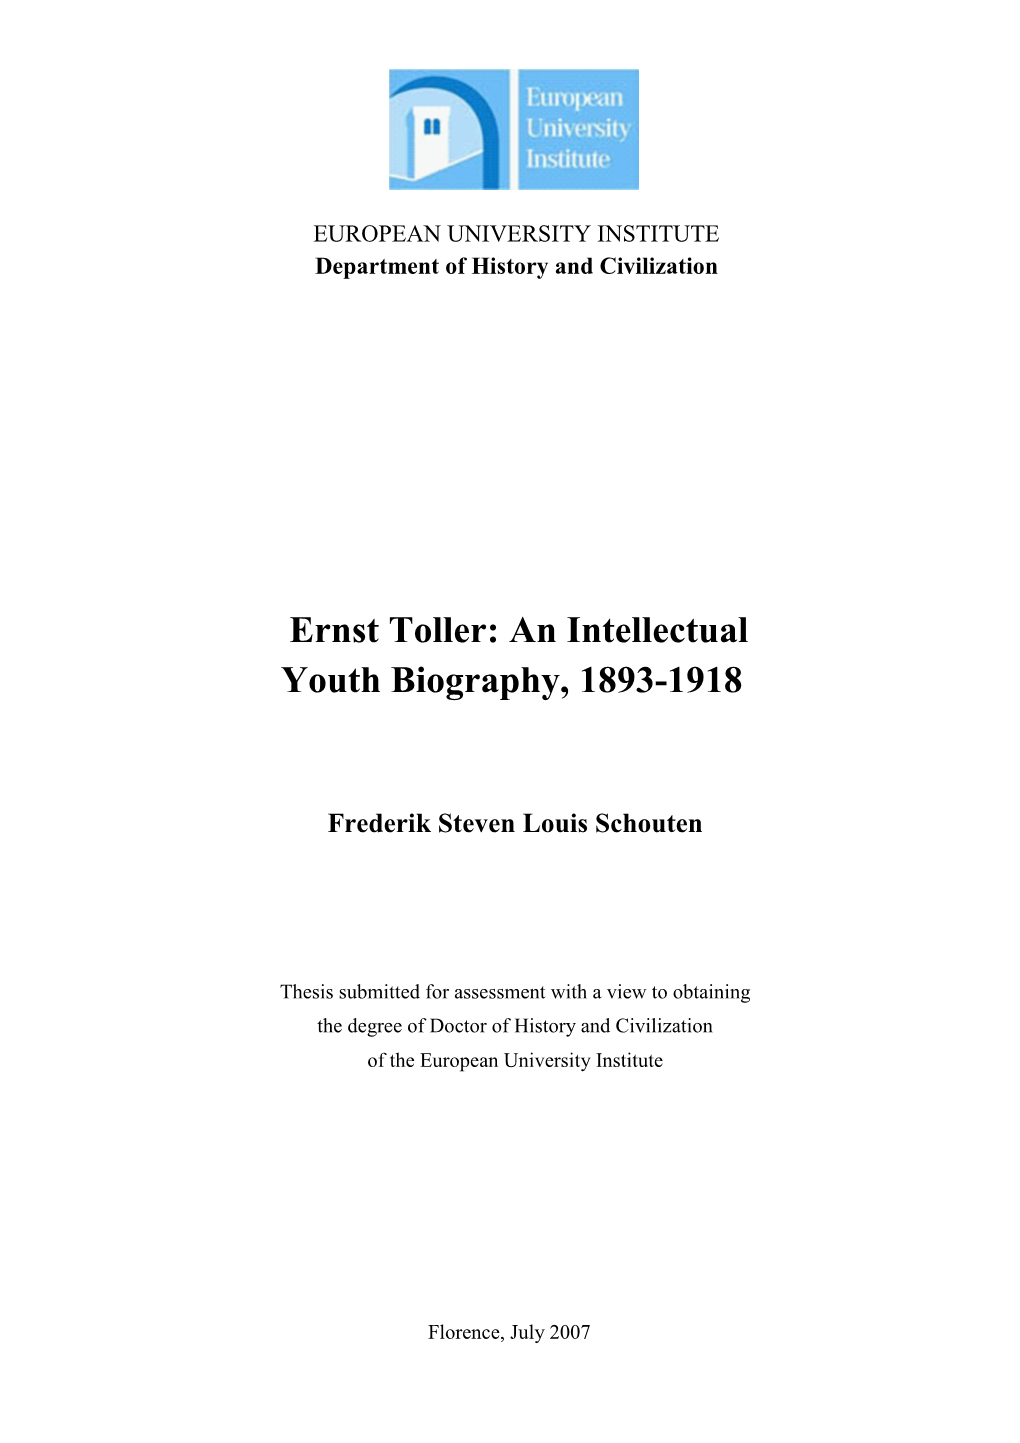 Ernst Toller: an Intellectual Youth Biography, 1893-1918